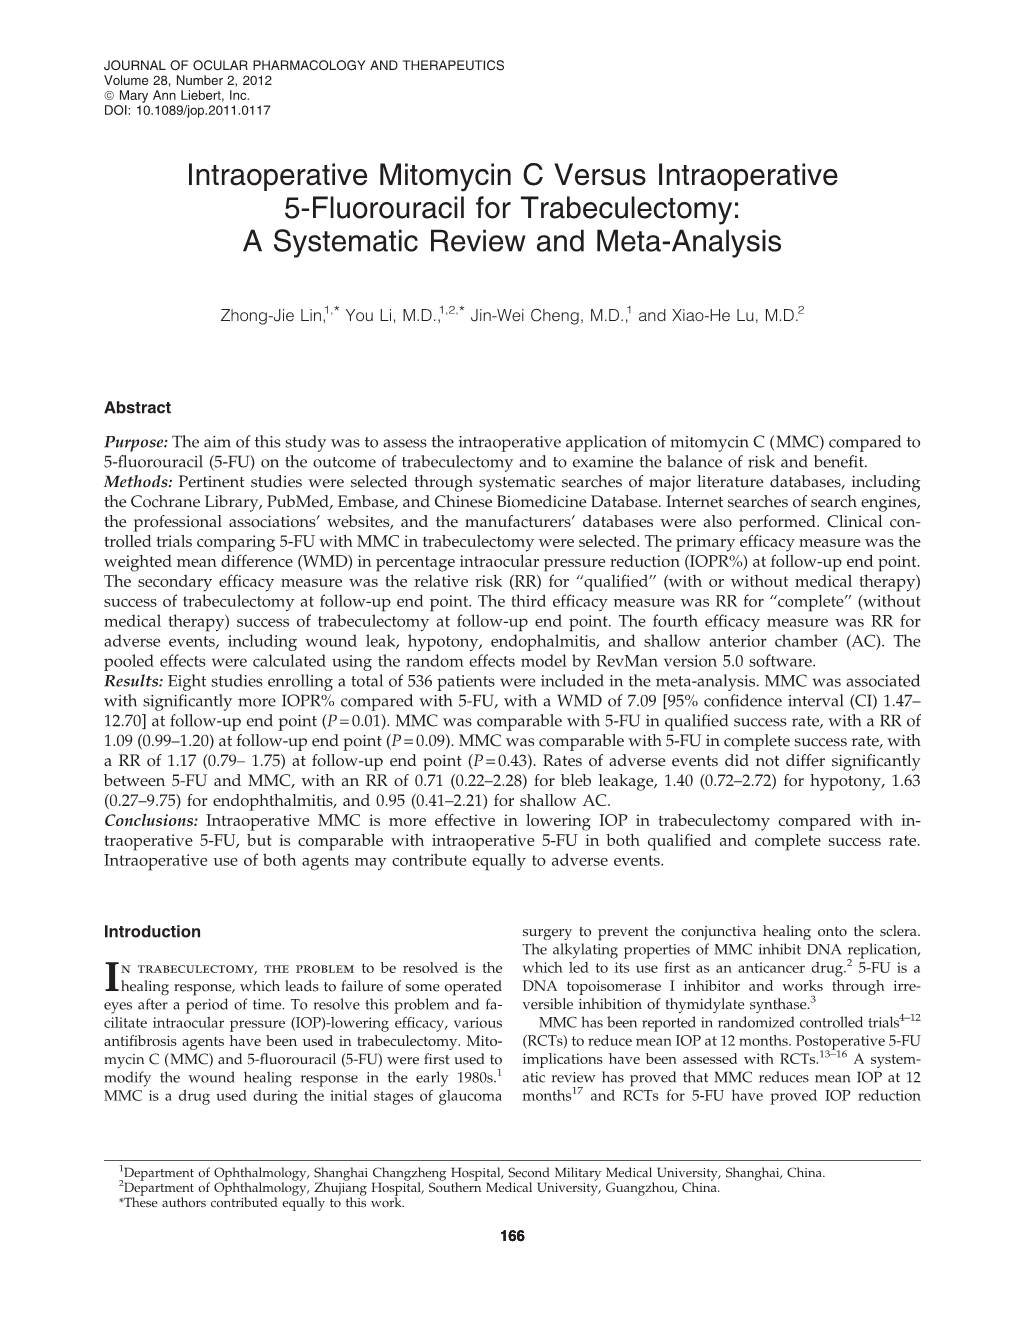 Intraoperative Mitomycin C Versus Intraoperative 5-Fluorouracil for Trabeculectomy: a Systematic Review and Meta-Analysis